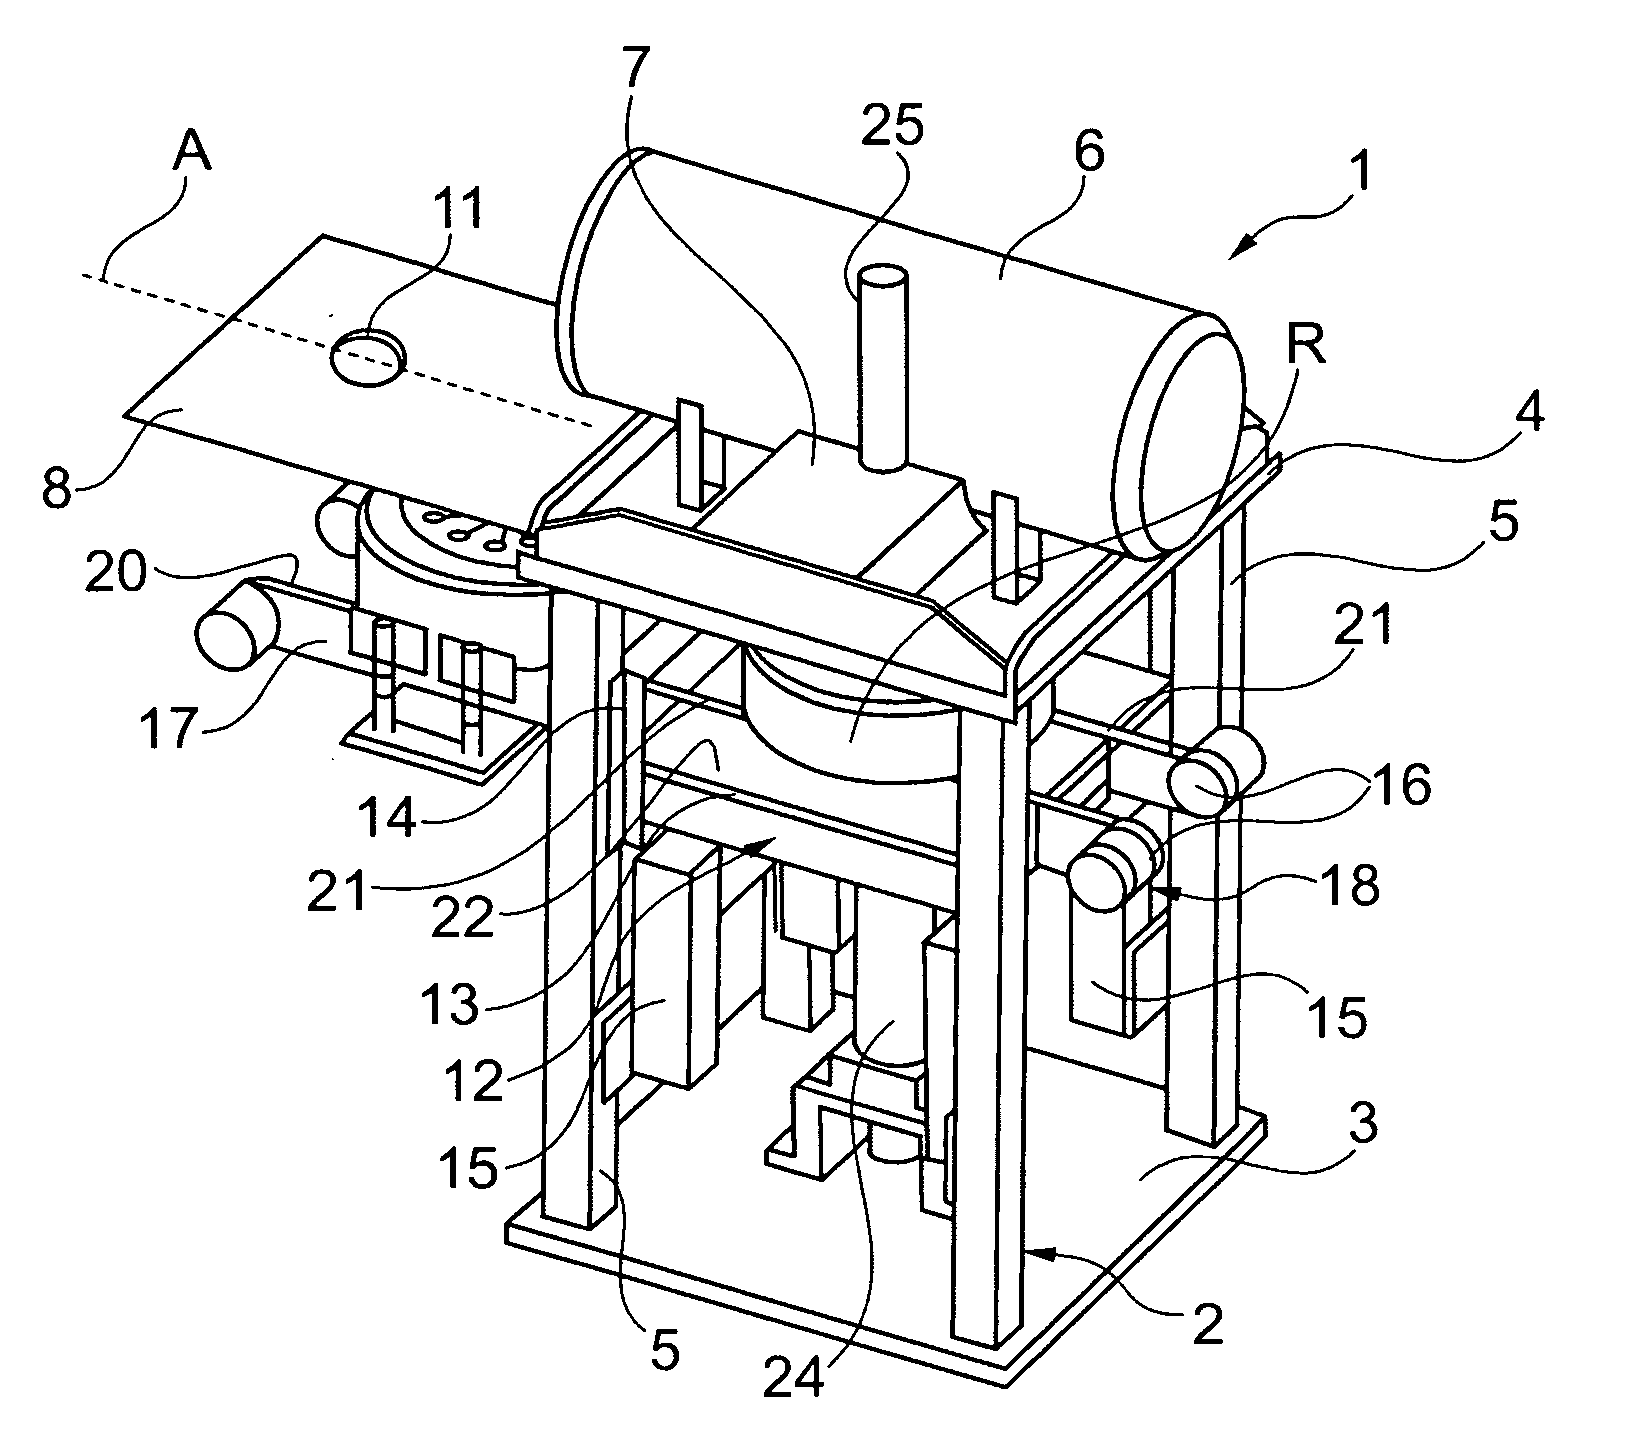 Tire inflating station and method for inflating tires